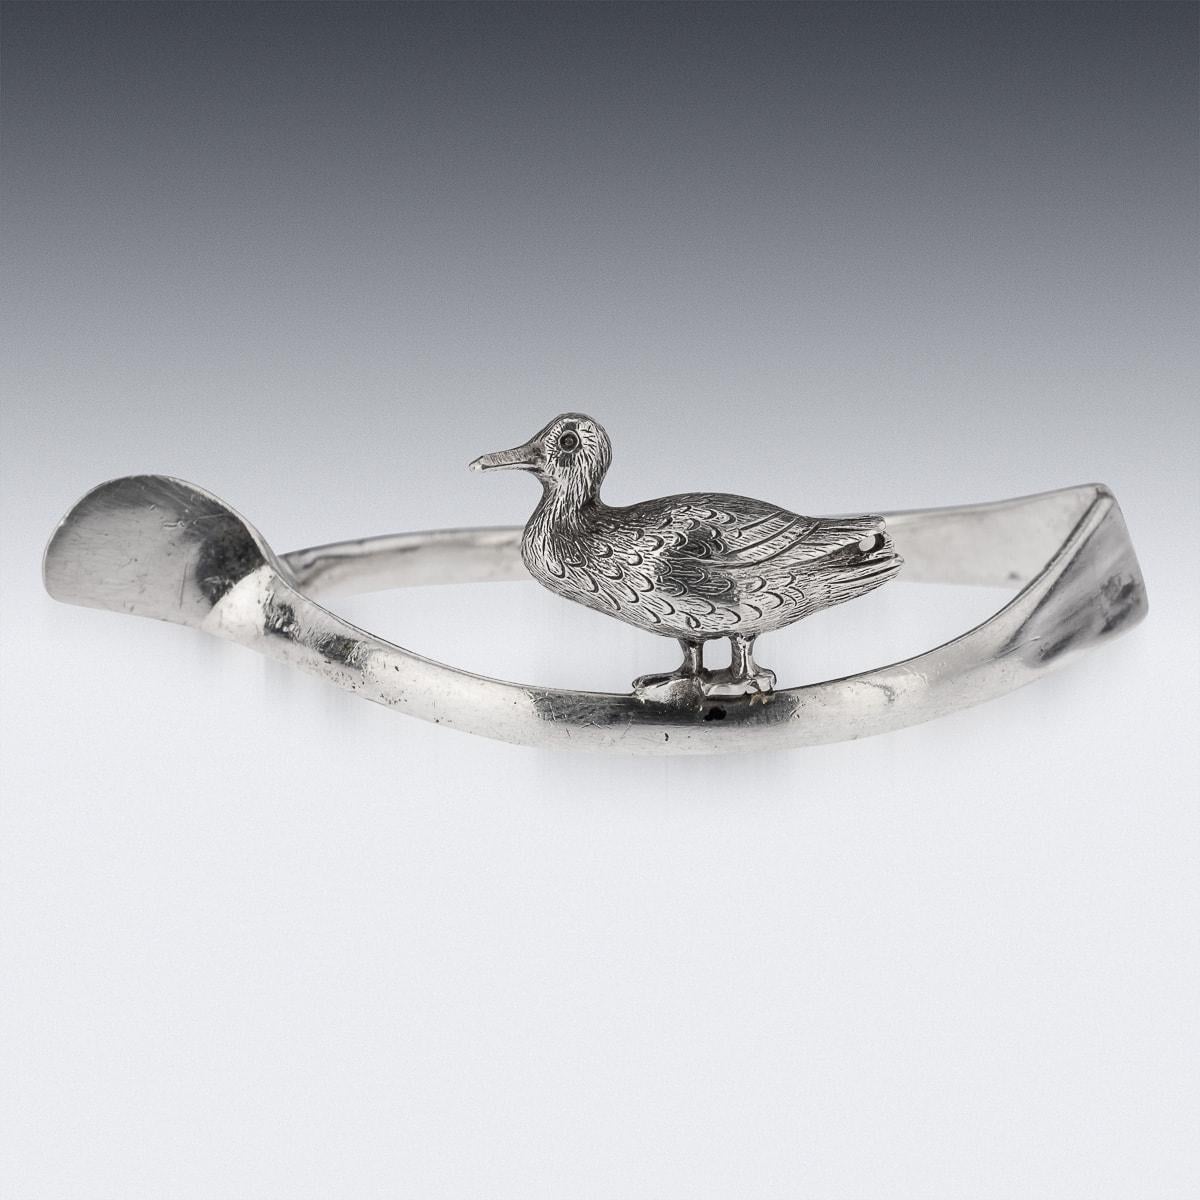 20th Century British Solid Silver 'Lucky Animals' Napkin Rings, Asprey, c.1913 For Sale 2